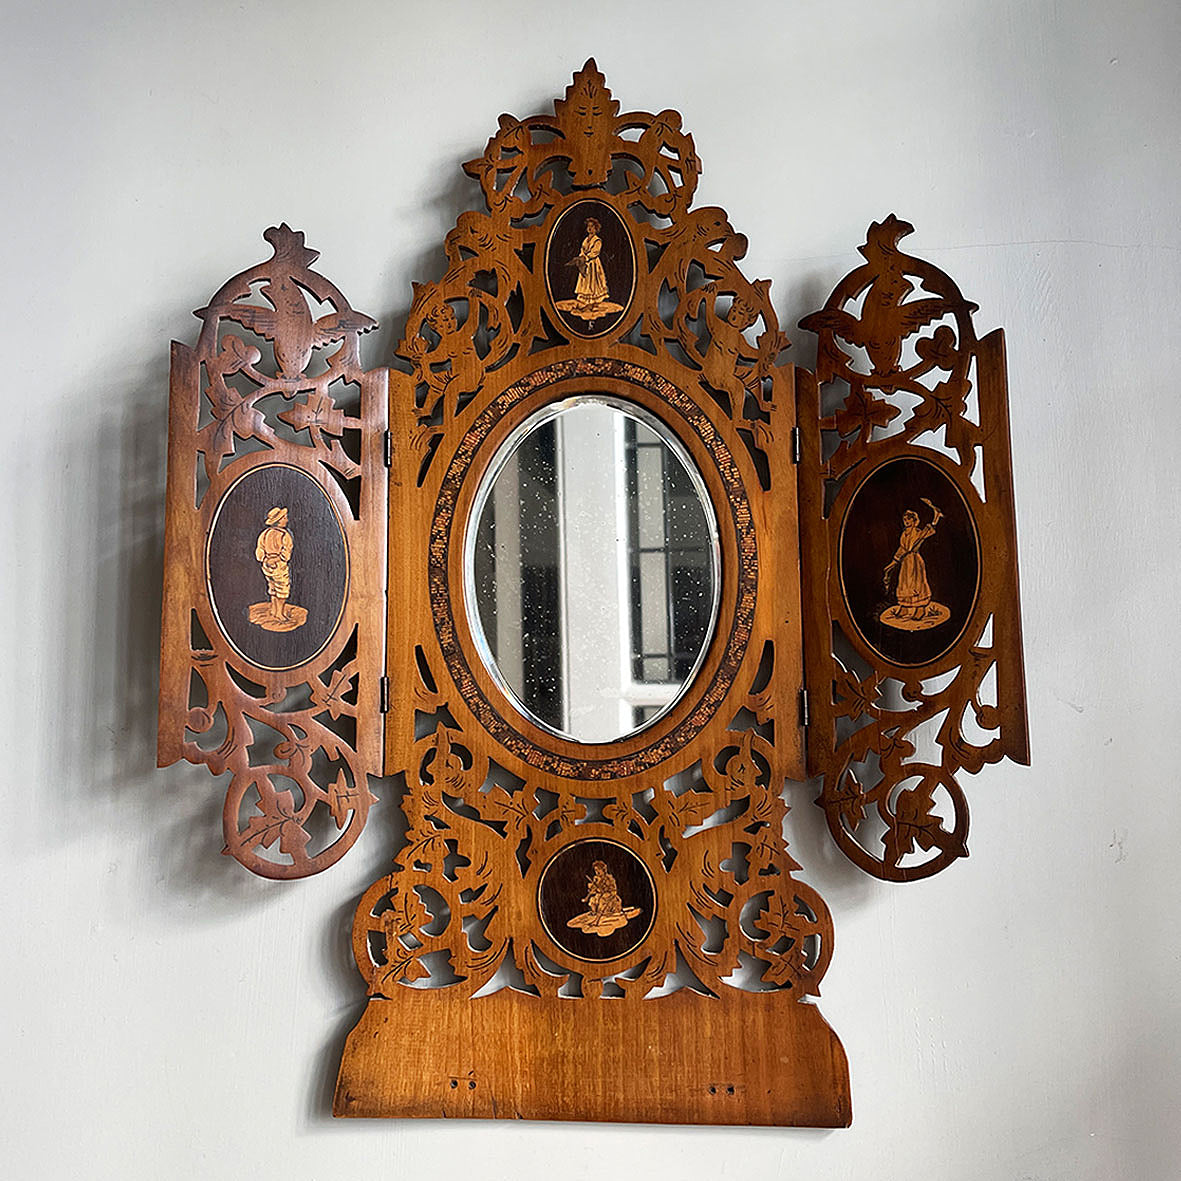 A pretty petit Italian Sorento Ware Olive Wood hinged-door Mirror. A charming mix of fretwork and marquetry showing country peasant scenes. Original mirror plate with slight foxing. A lovely piece with great colour. - SHOP NOW - www.intovintage.co.uk